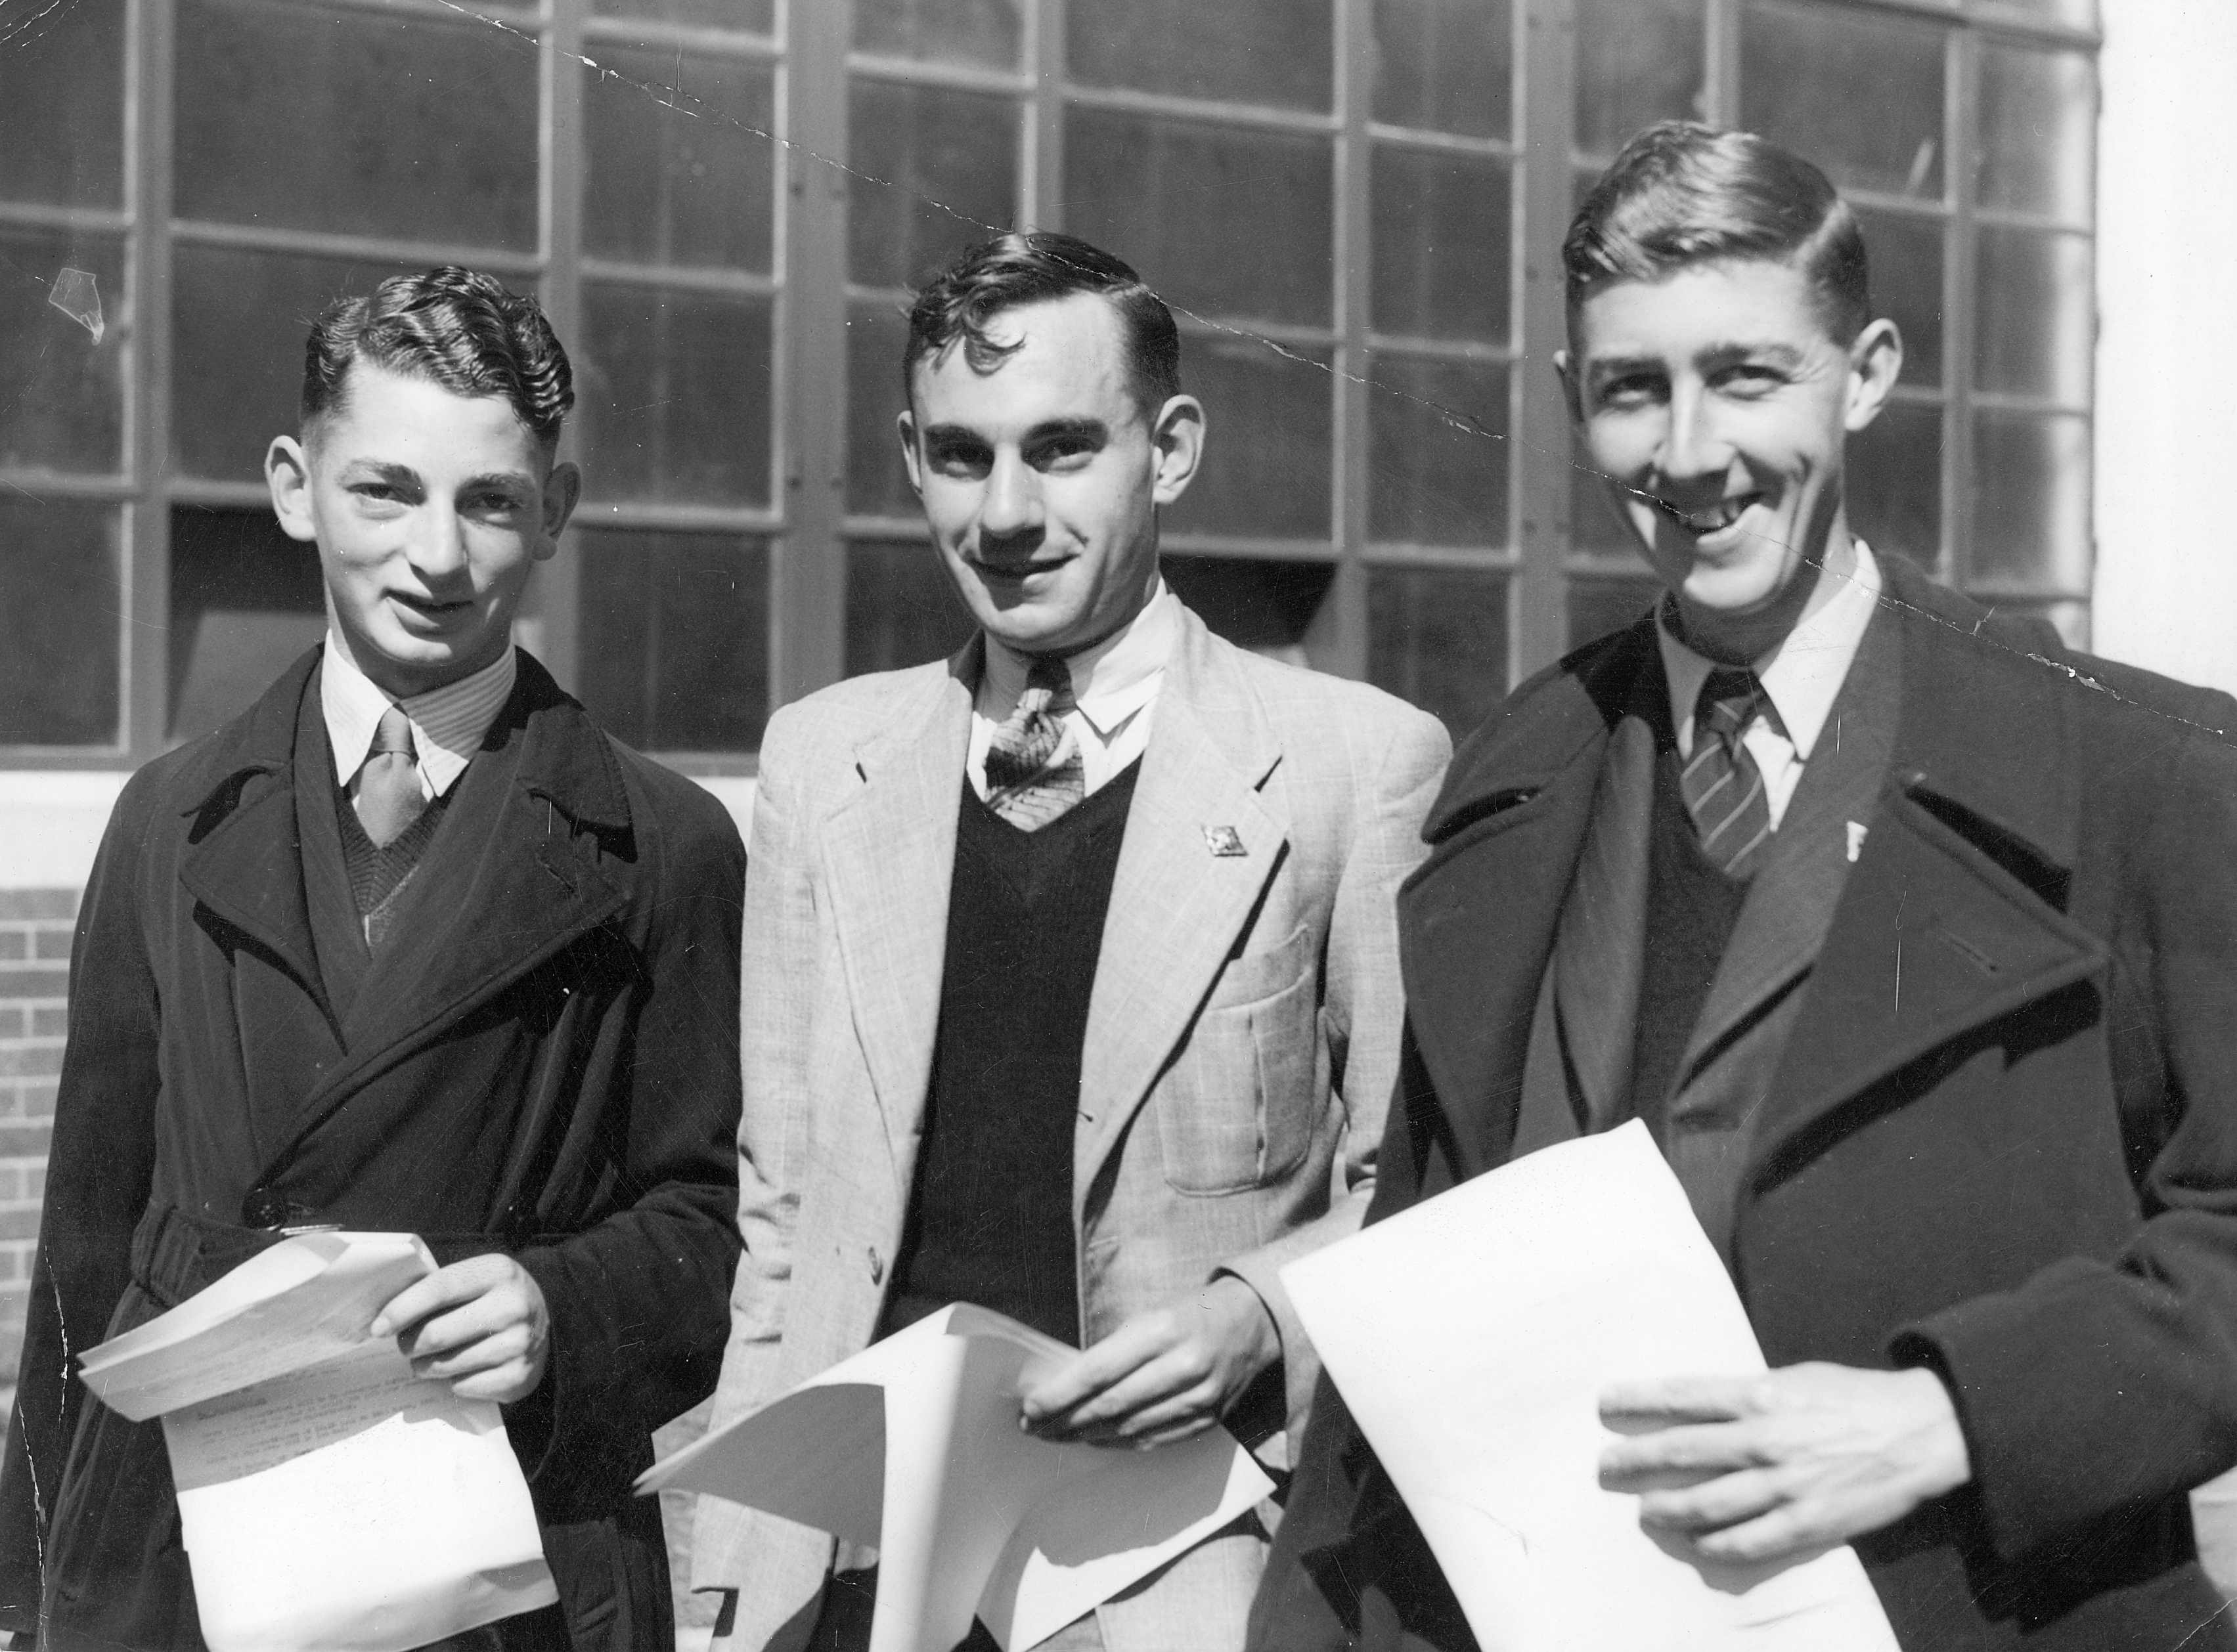 Three ex-RAAF doing engineering at University (interviewee not pictured), 1946. Photographer unknown. Argus Newspaper Collection of Photographs, State Library Victoria, H99.201.1674.jpg